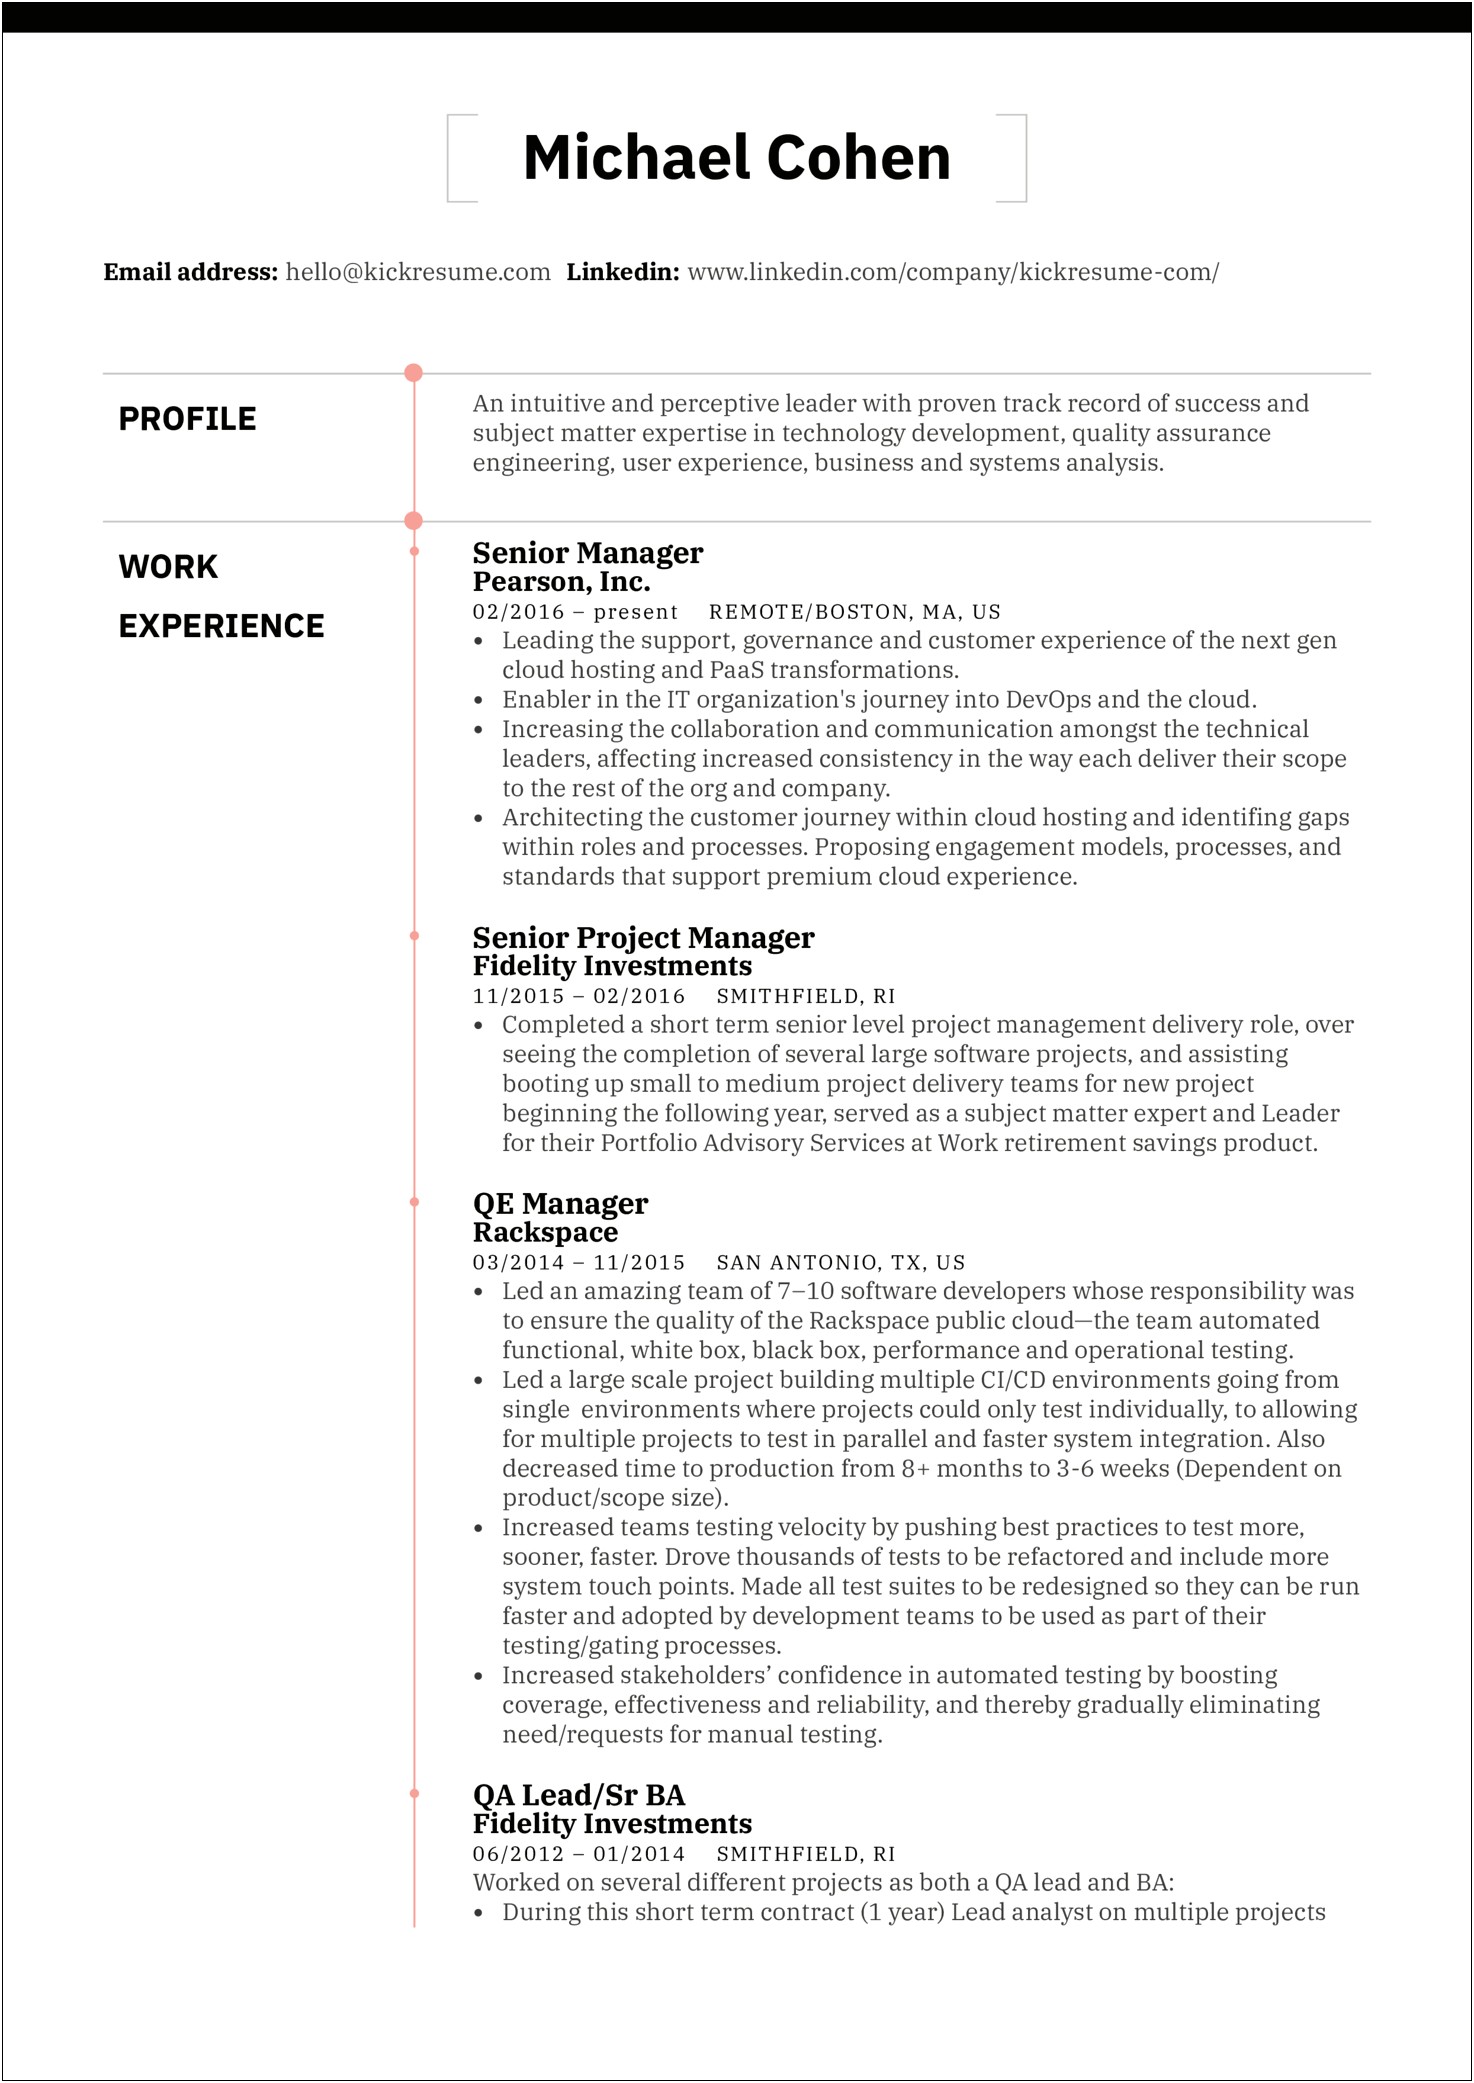 Resume Format For 1.5 Years Experience